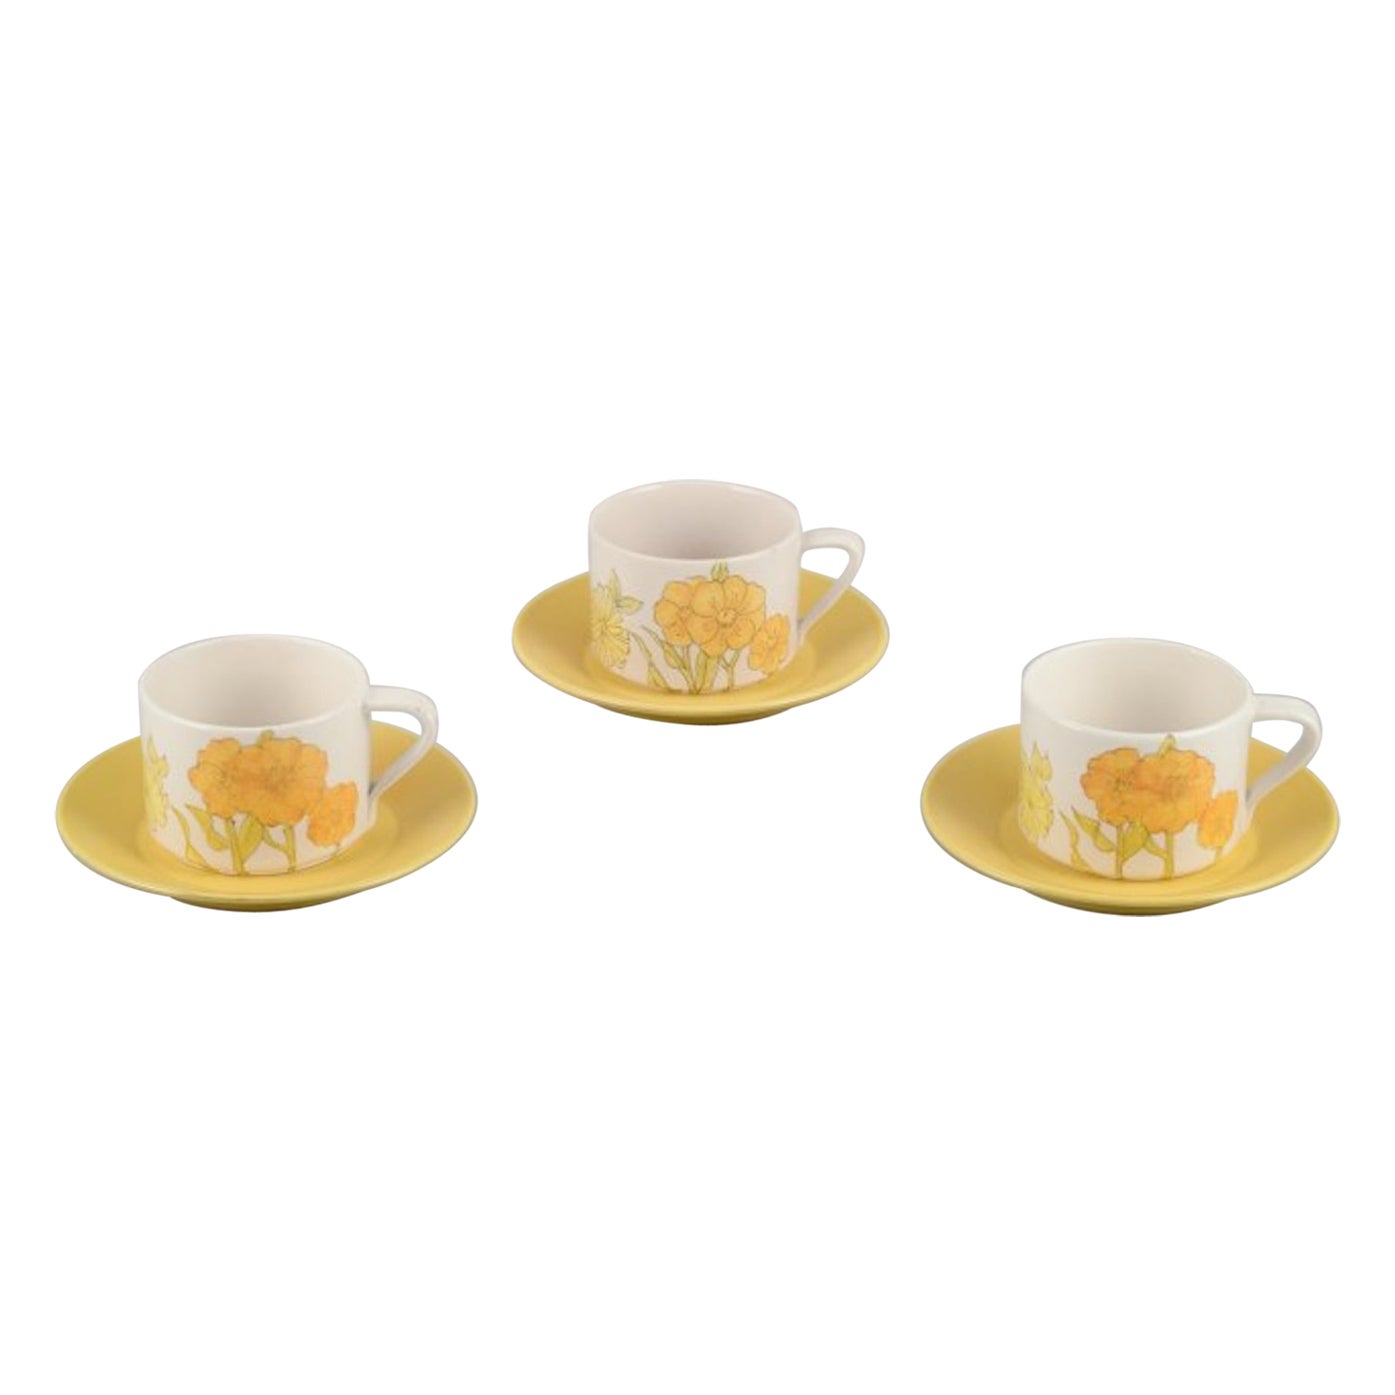 Ernestine Salerno, Italy. Three large coffee cups/morning cups with saucers. For Sale